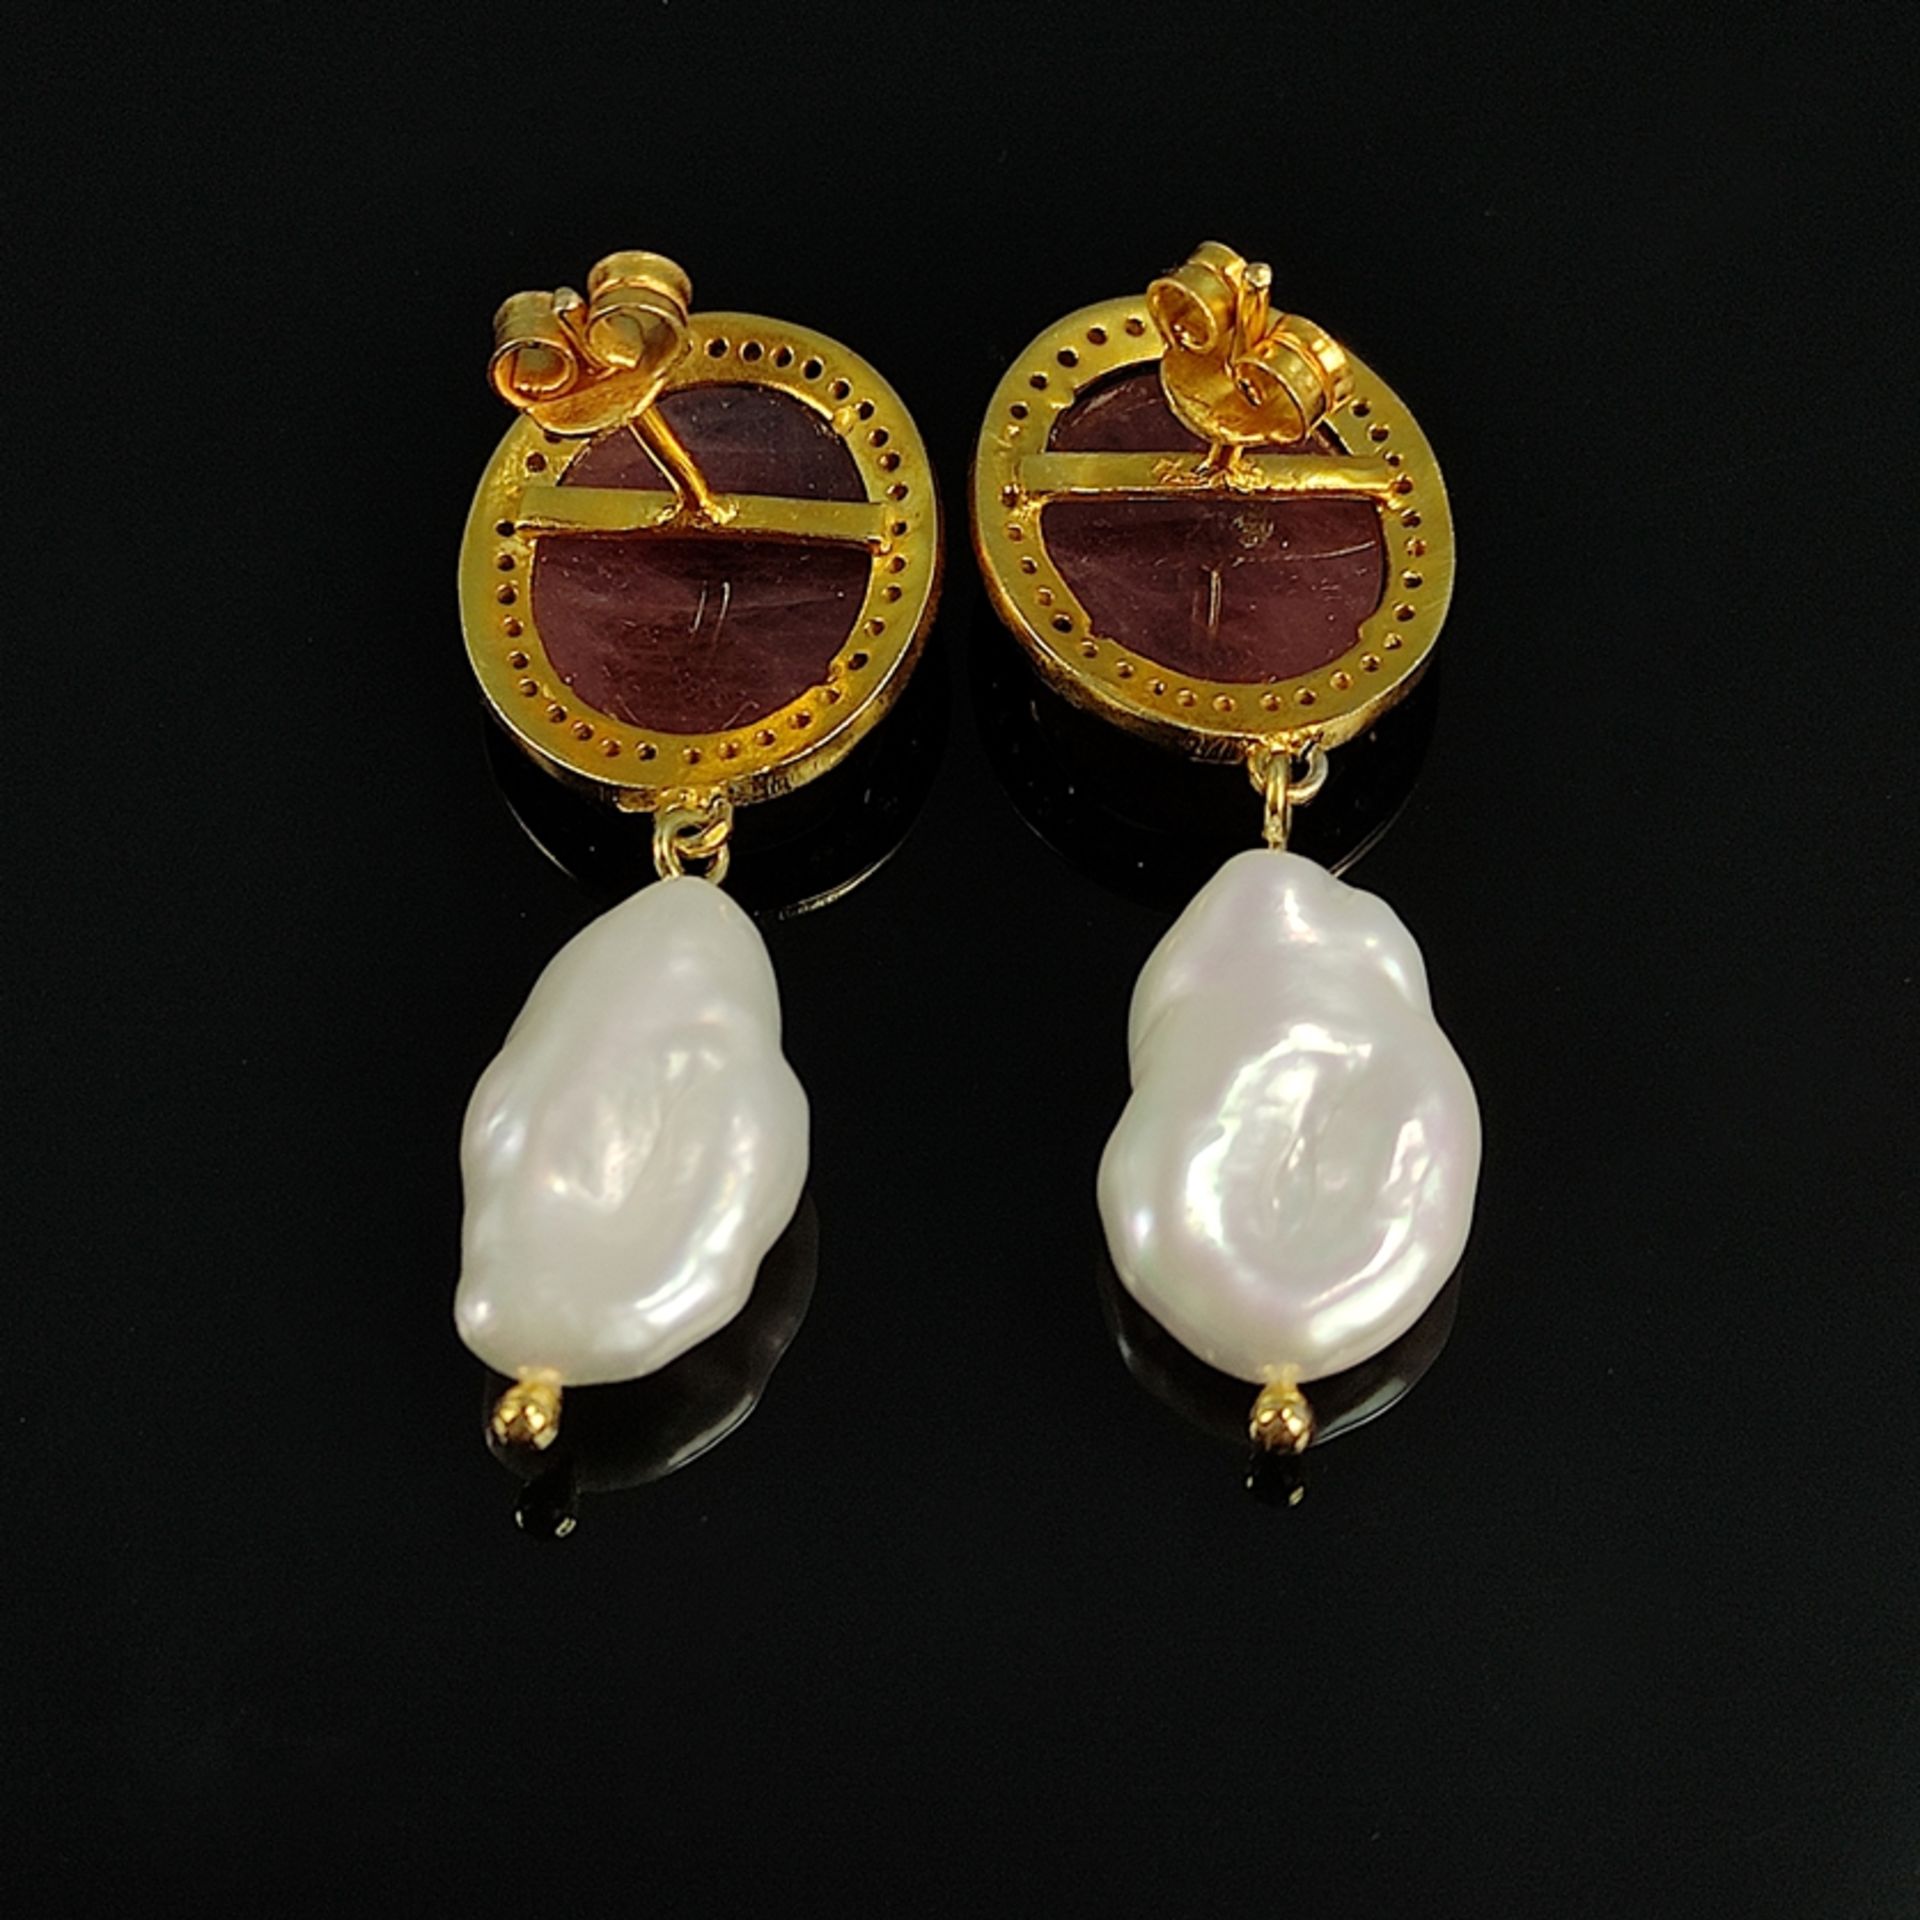 Designer sapphire- keshi pearl earrings, silver 925 in 585/14K yellow gold plated, 10,5g, faceted r - Image 3 of 4